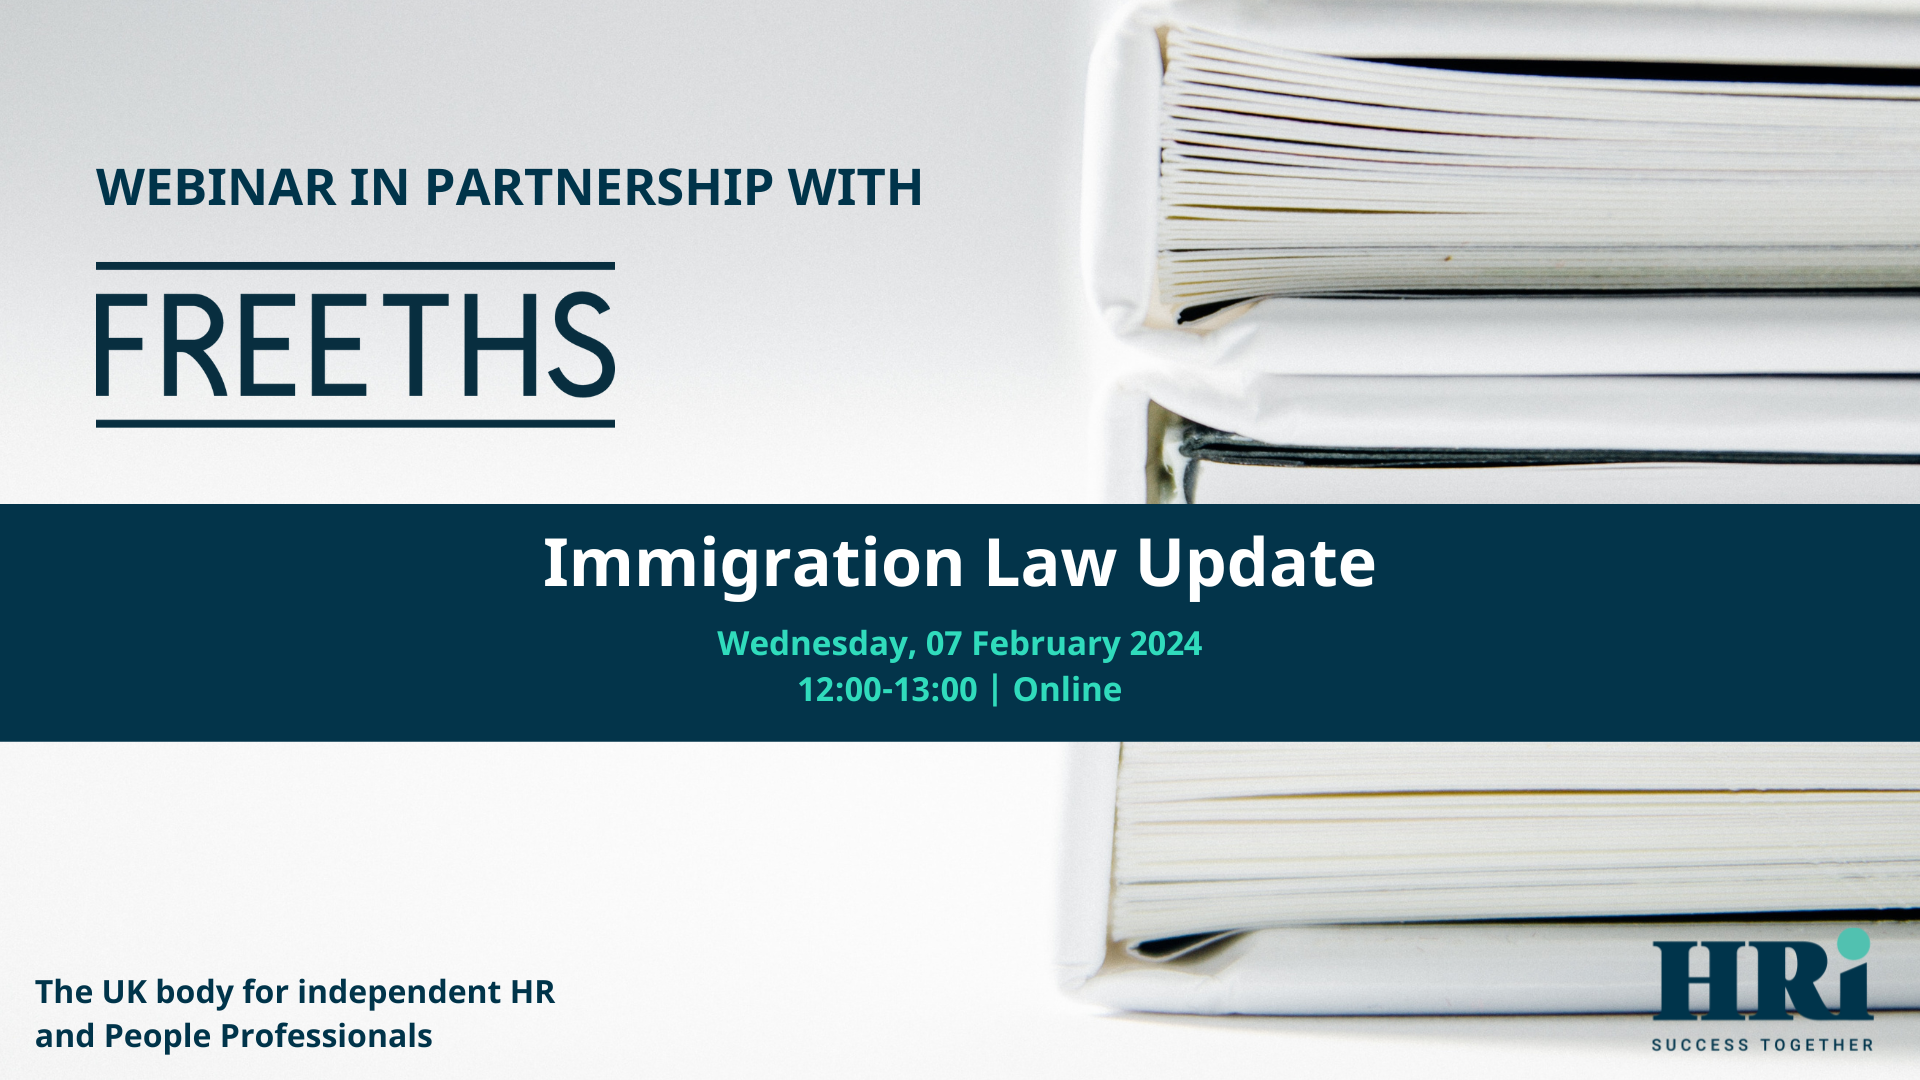 Immigration Law update Freeths